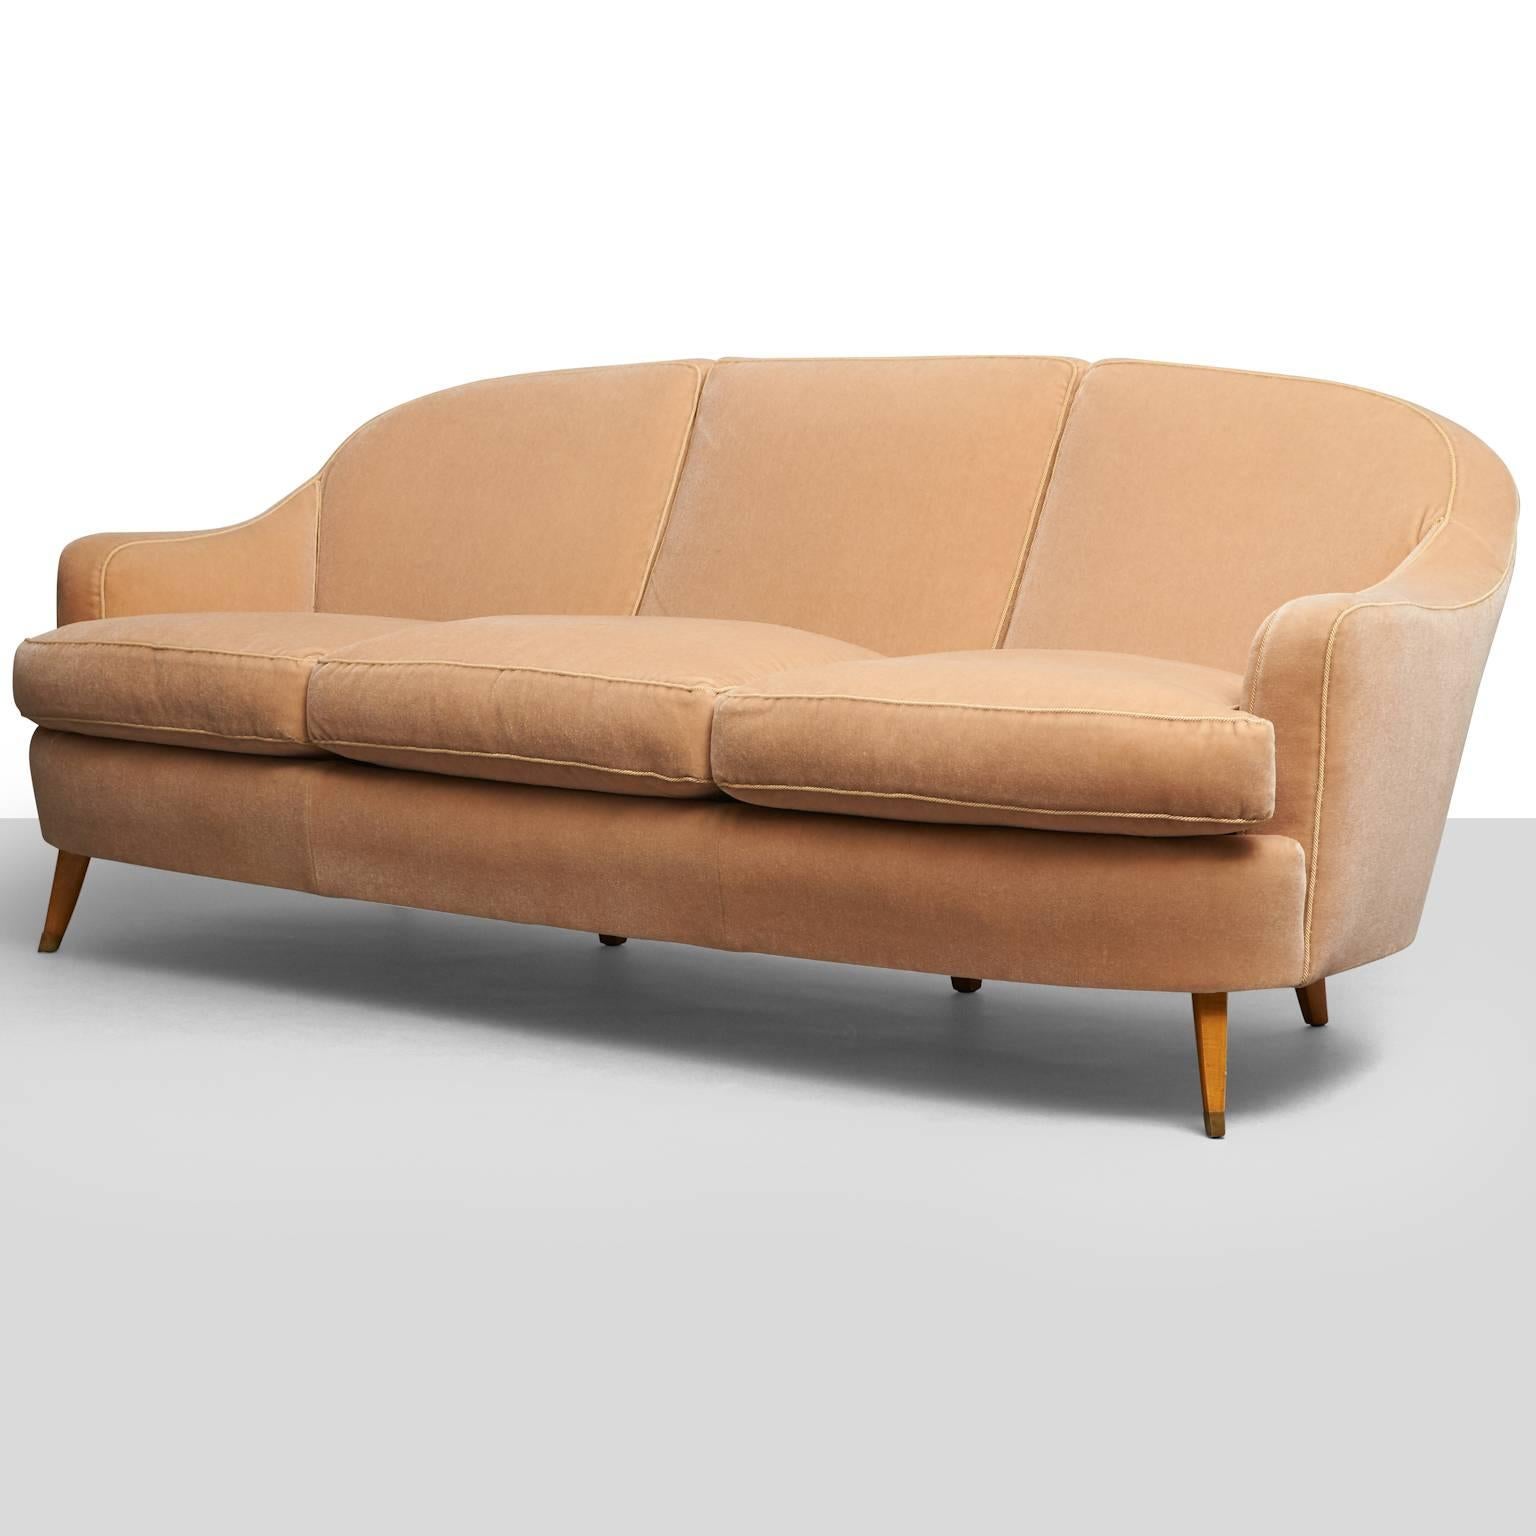 A sofa by Jules Leleu. Legs fitted with gilt brass, recently restored in velvet with contrast cord trim.